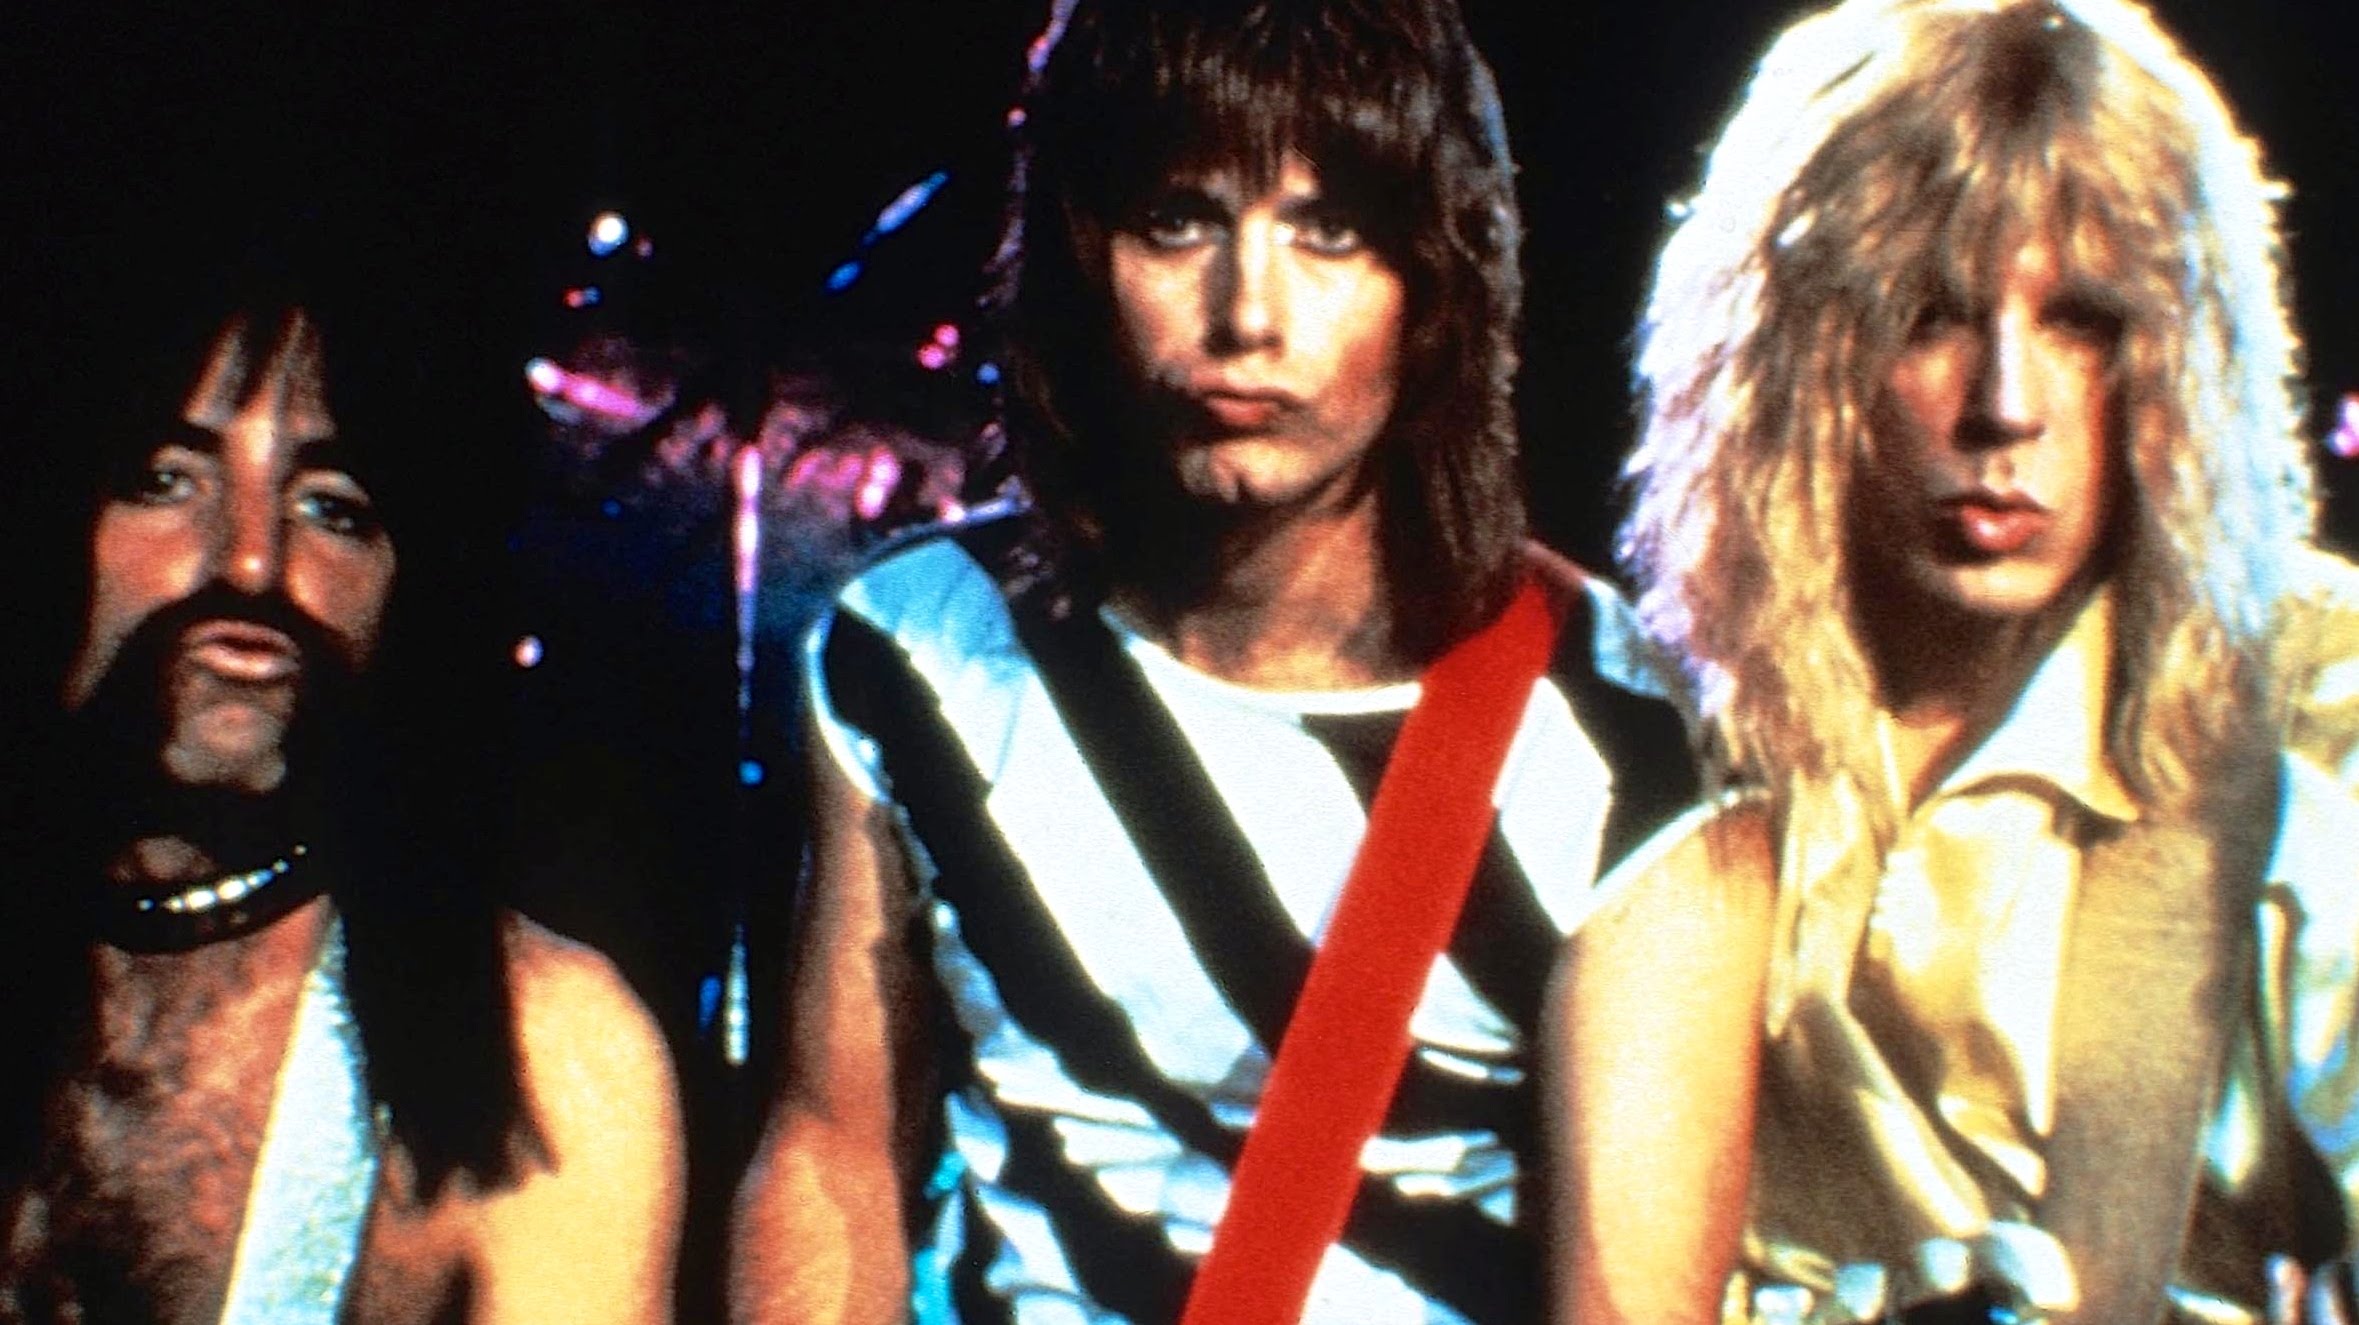 Nice wallpapers Spinal Tap 2359x1325px